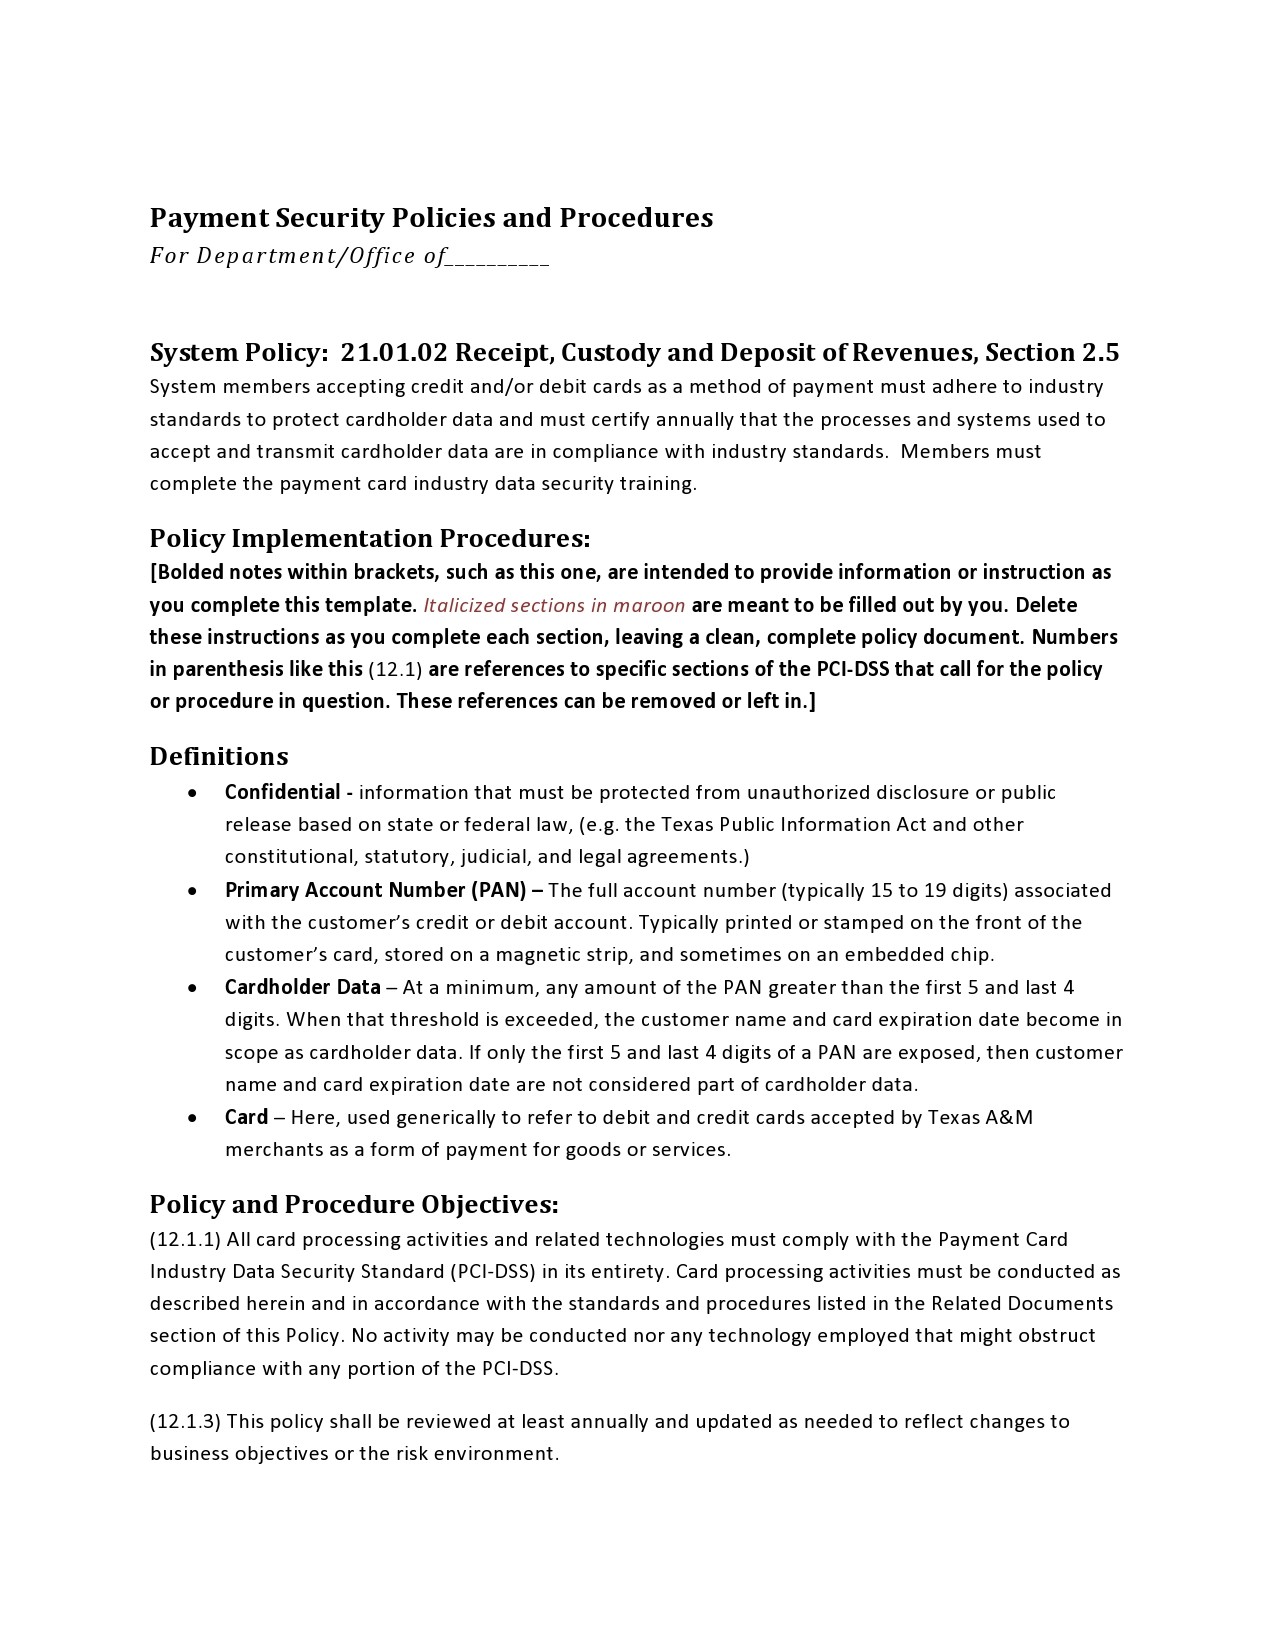 50 Free Policy And Procedure Templates ( Manuals) ᐅ TemplateLab